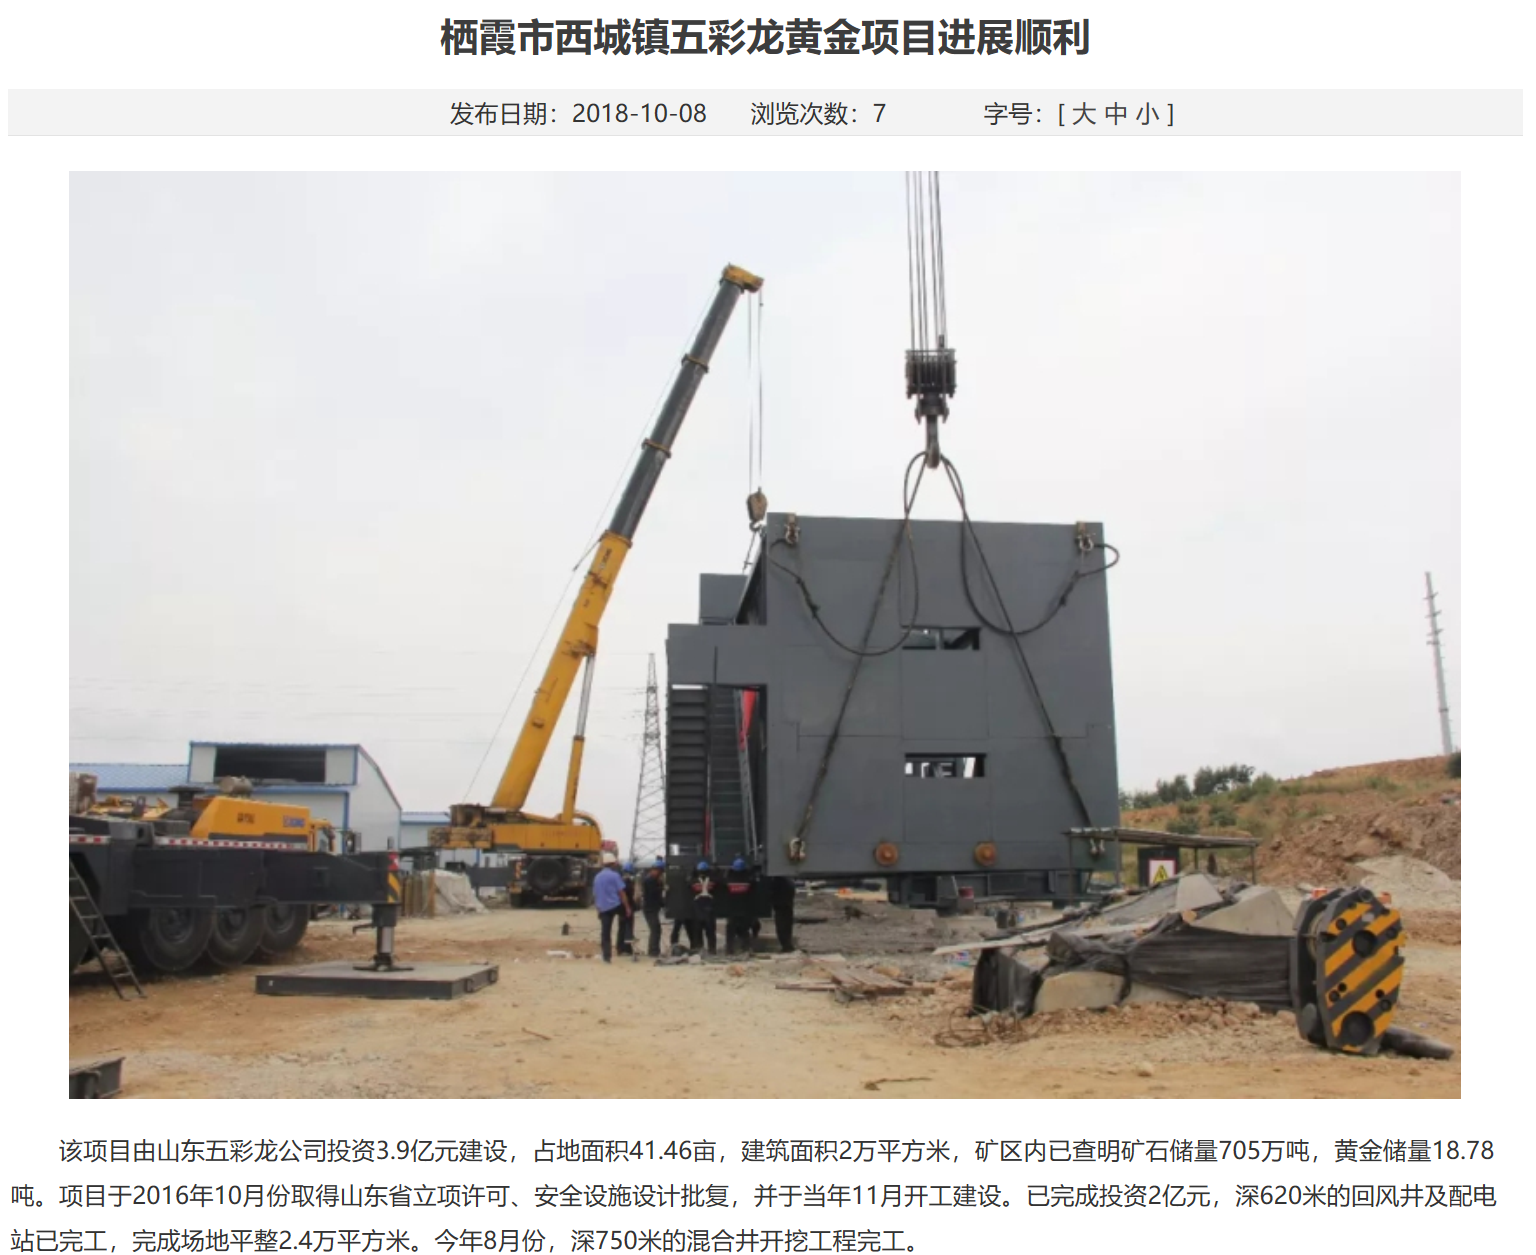 Backside of accident of explosion of Yantai gold mine: Priority discipline investment is close 400 million, 